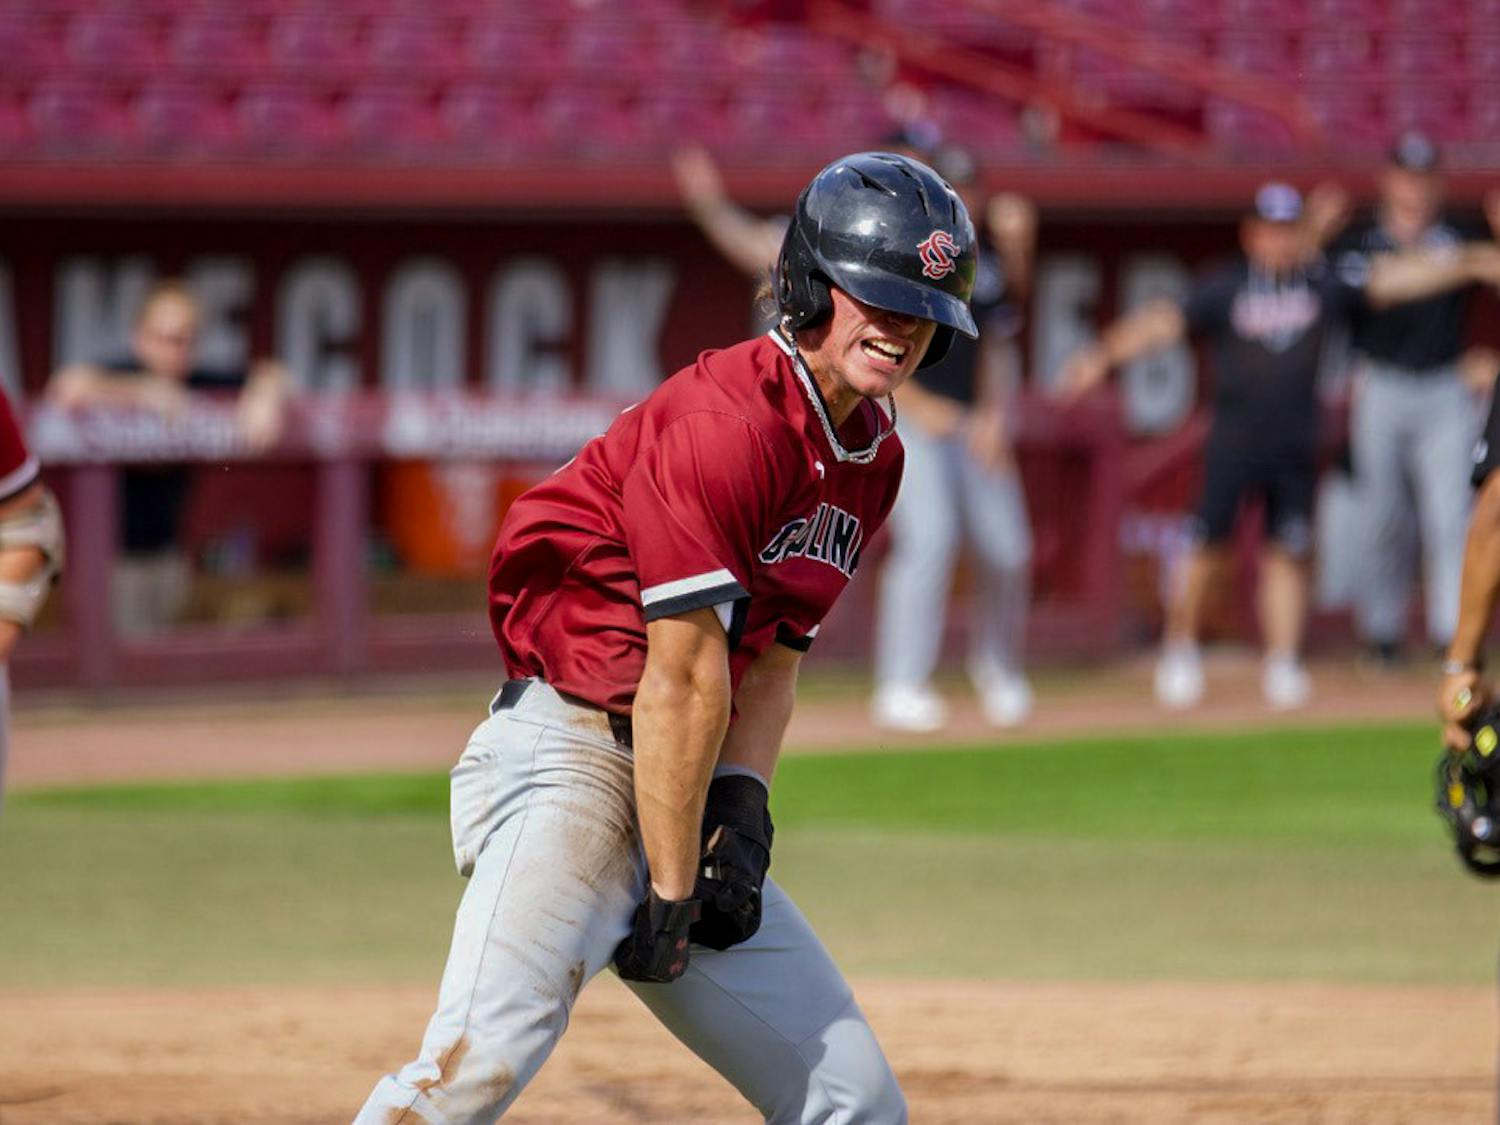 Sophomore outfielder Evan Stone celebrates scoring an early run for the Garnet team on Nov. 5, 2022. Stone participated in 46 games with Gamecocks last season, starting a total of 28 times.